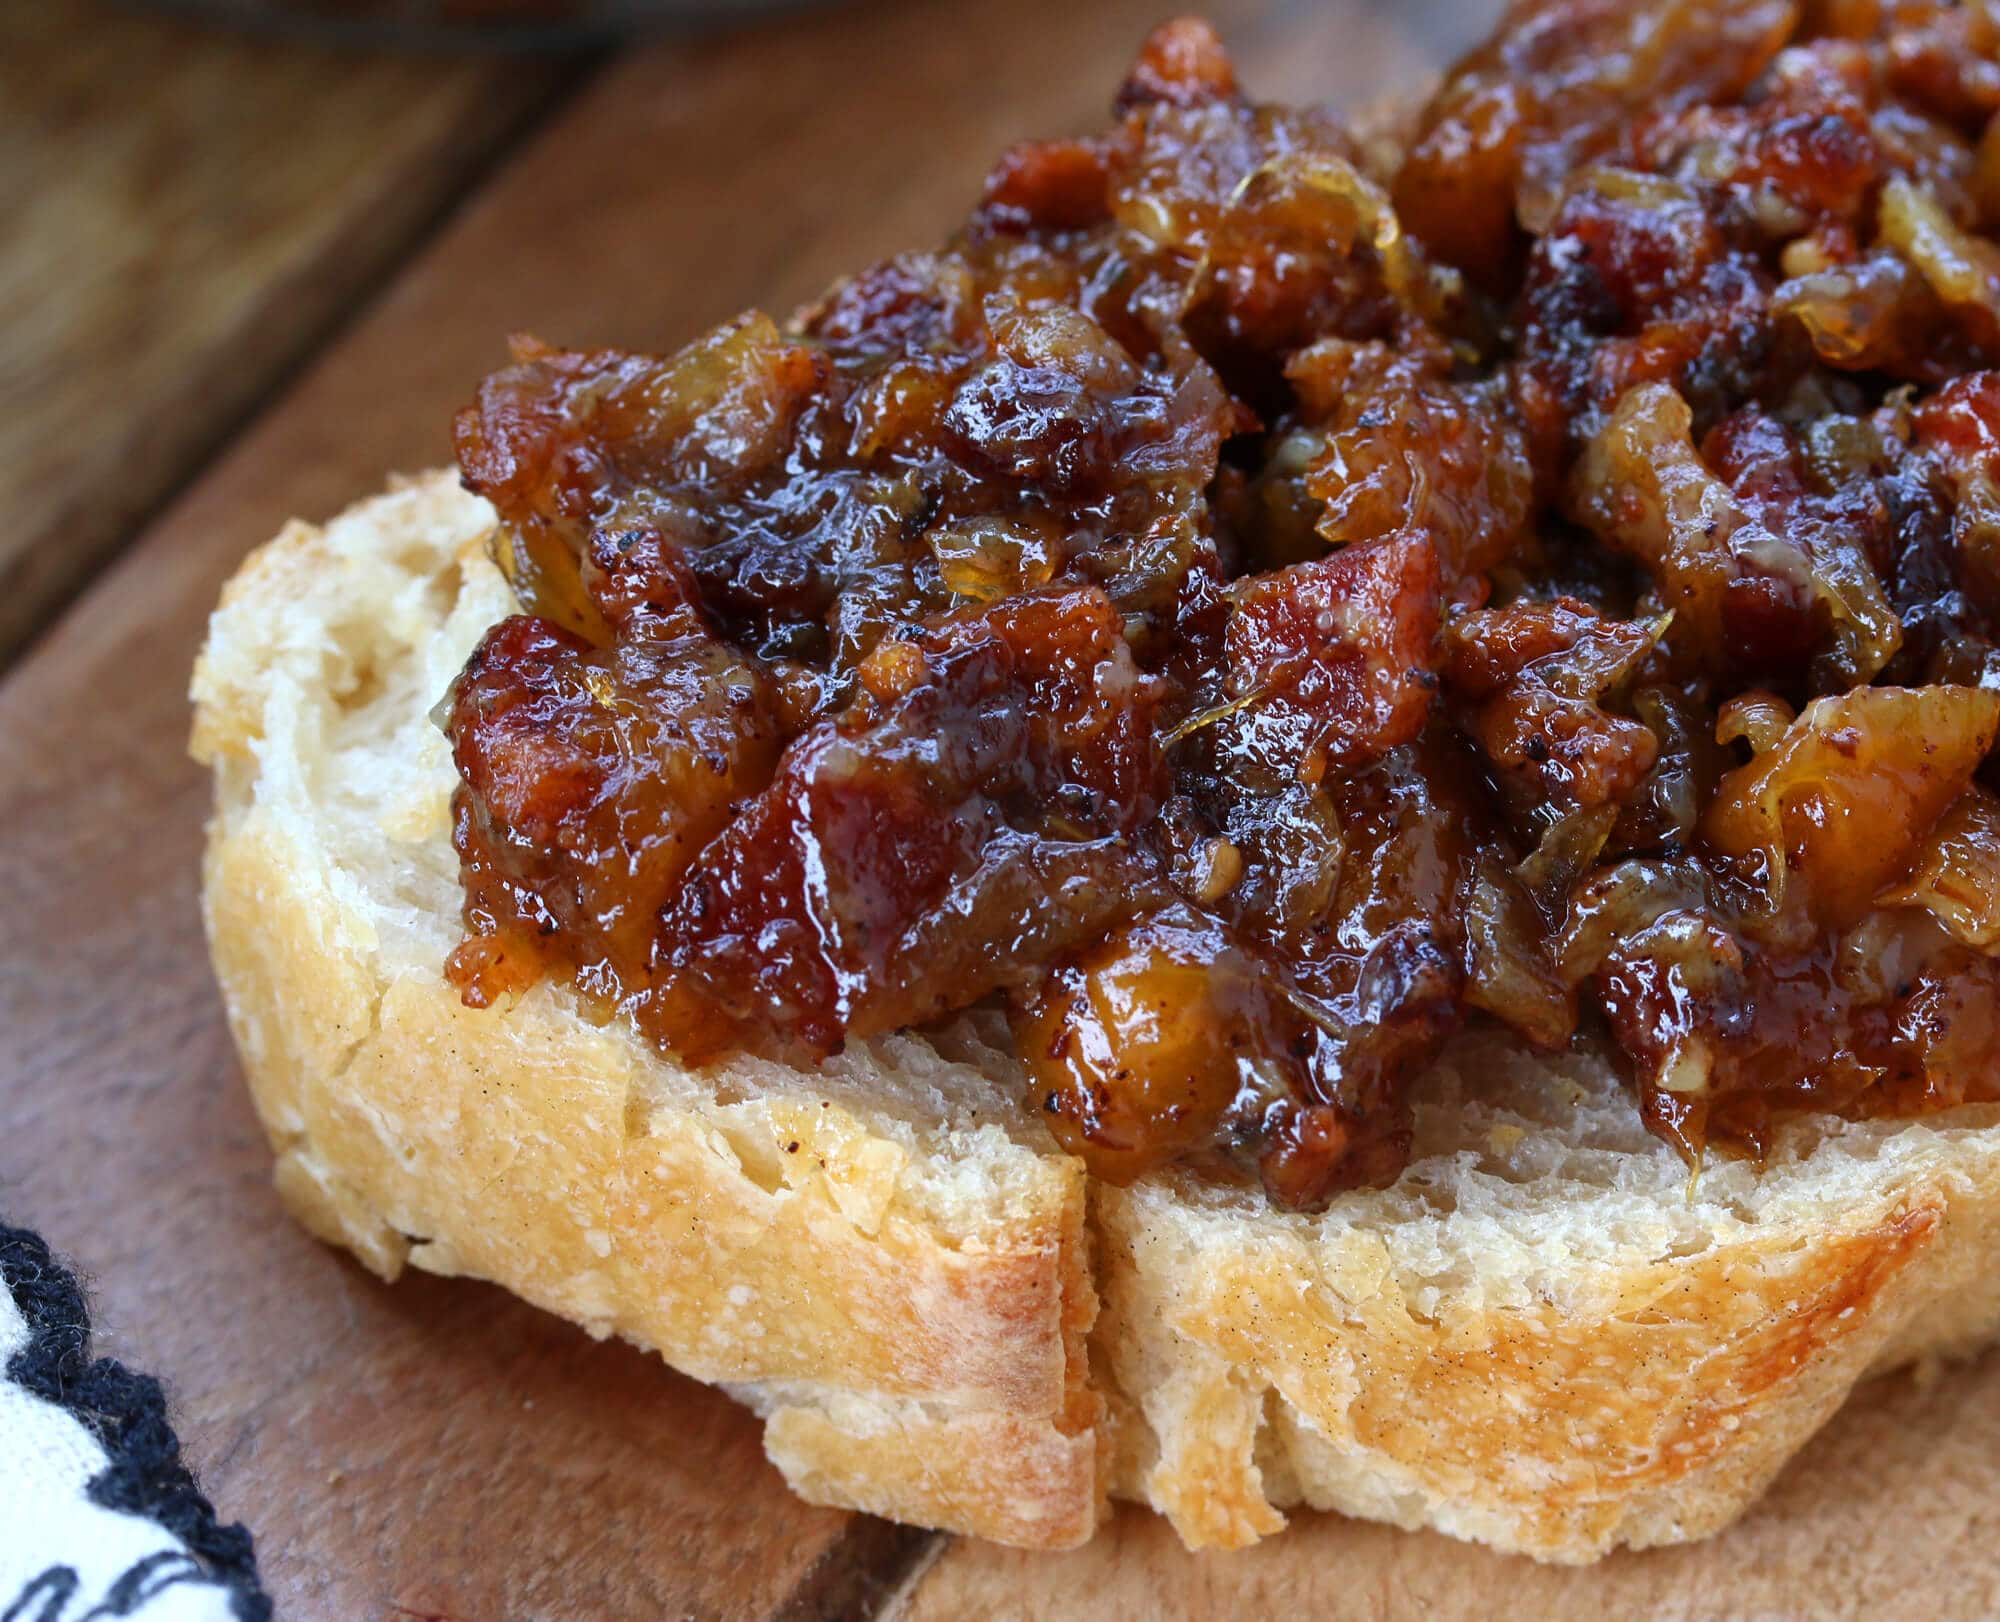 bacon jam recipe peach spread condiment bread sandwiches hors d'oeuvres appetizer entertaining 